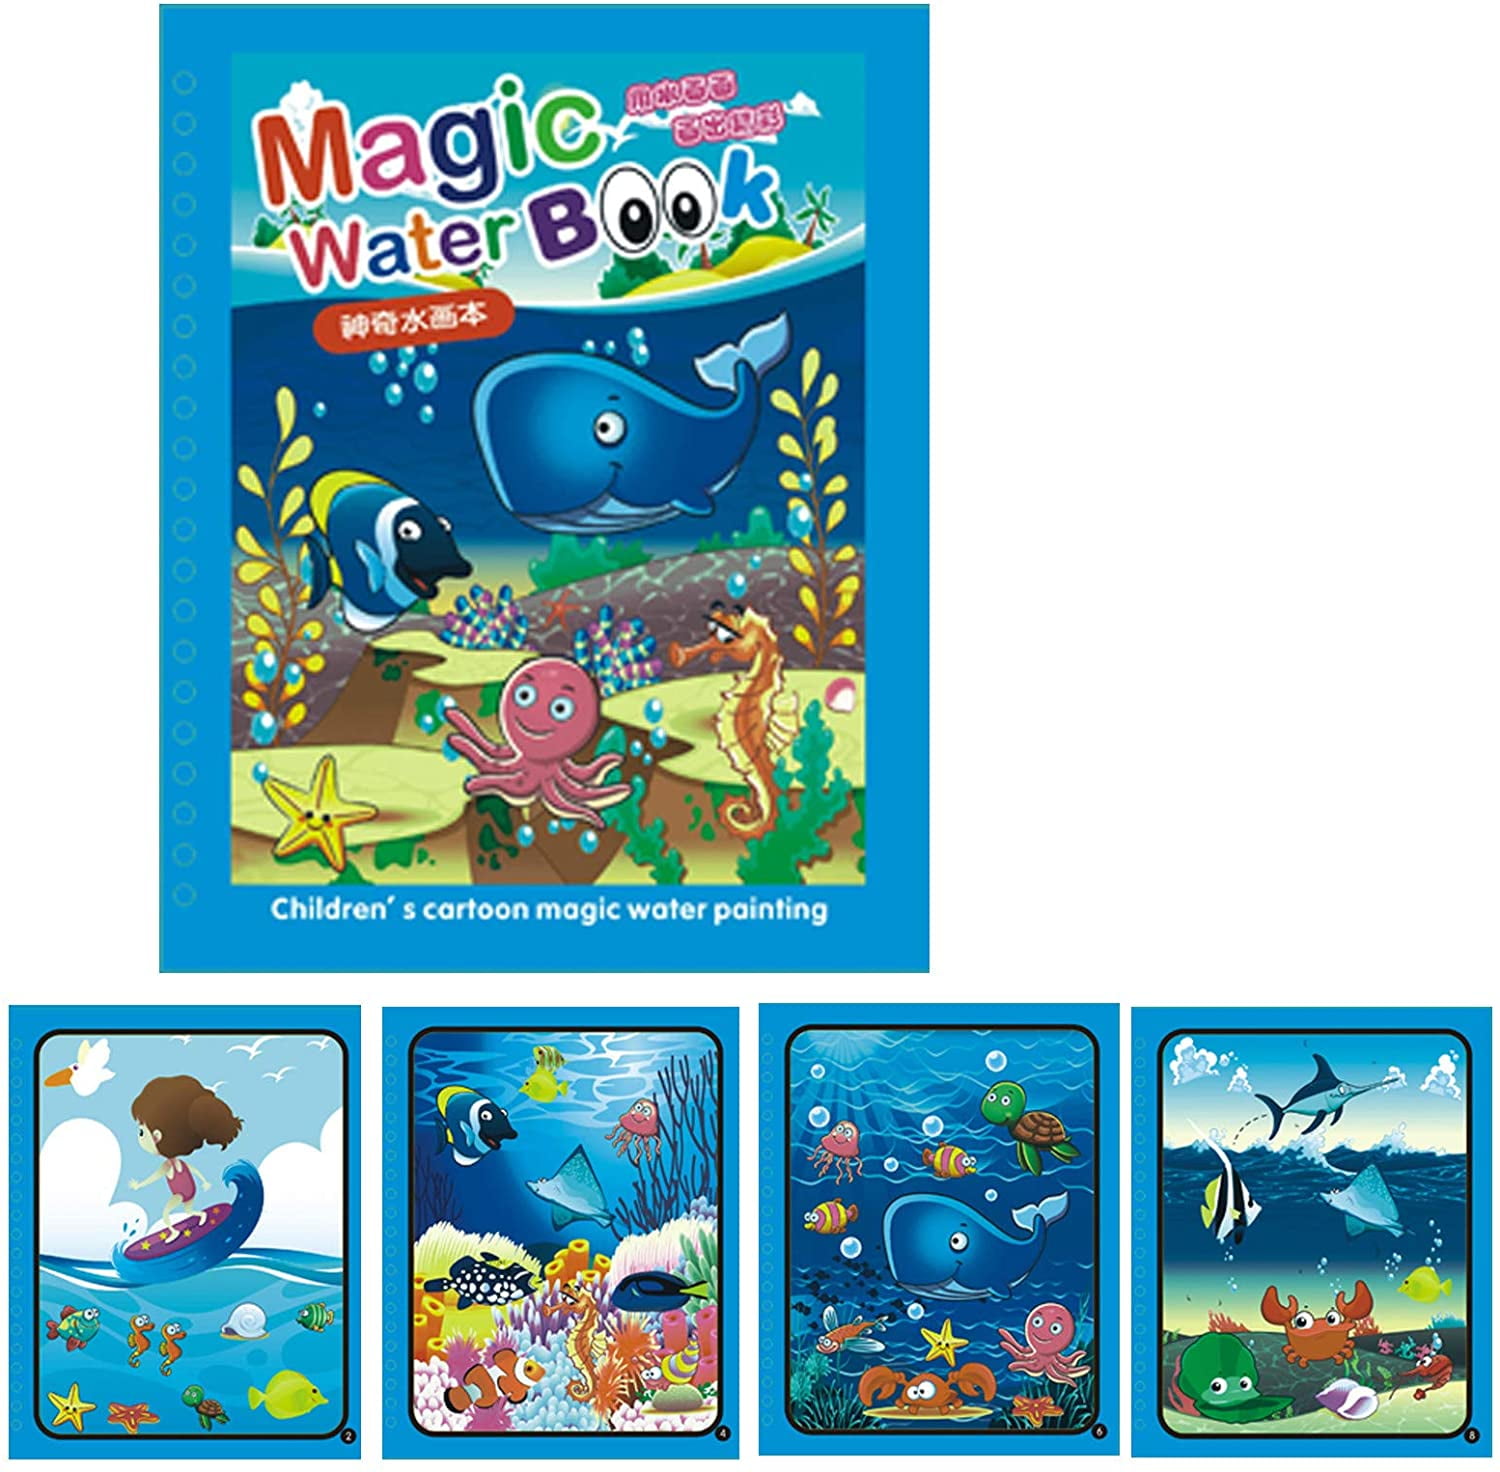 Little Bado Magical Kids Water Educational Coloring Funny Activity Books  for Kids with Water Pen Water no Mess Paint with Water Books for Toddlers 3  4